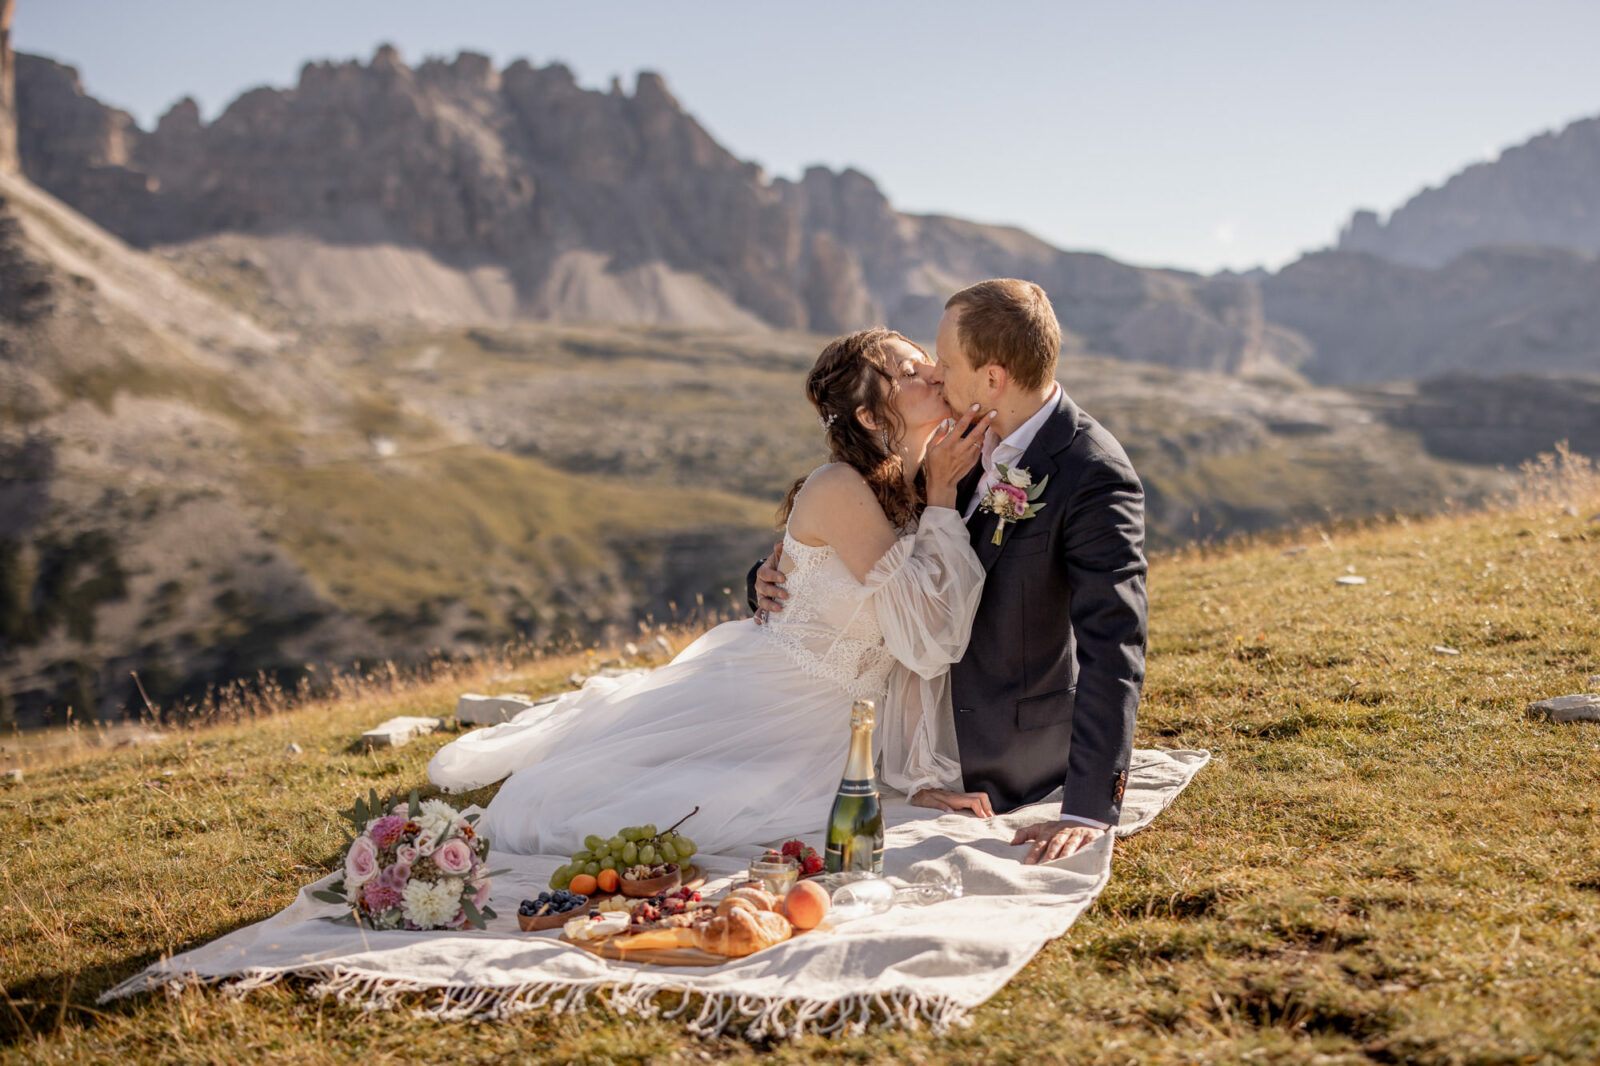 Elopement wedding picnic in the dolomites